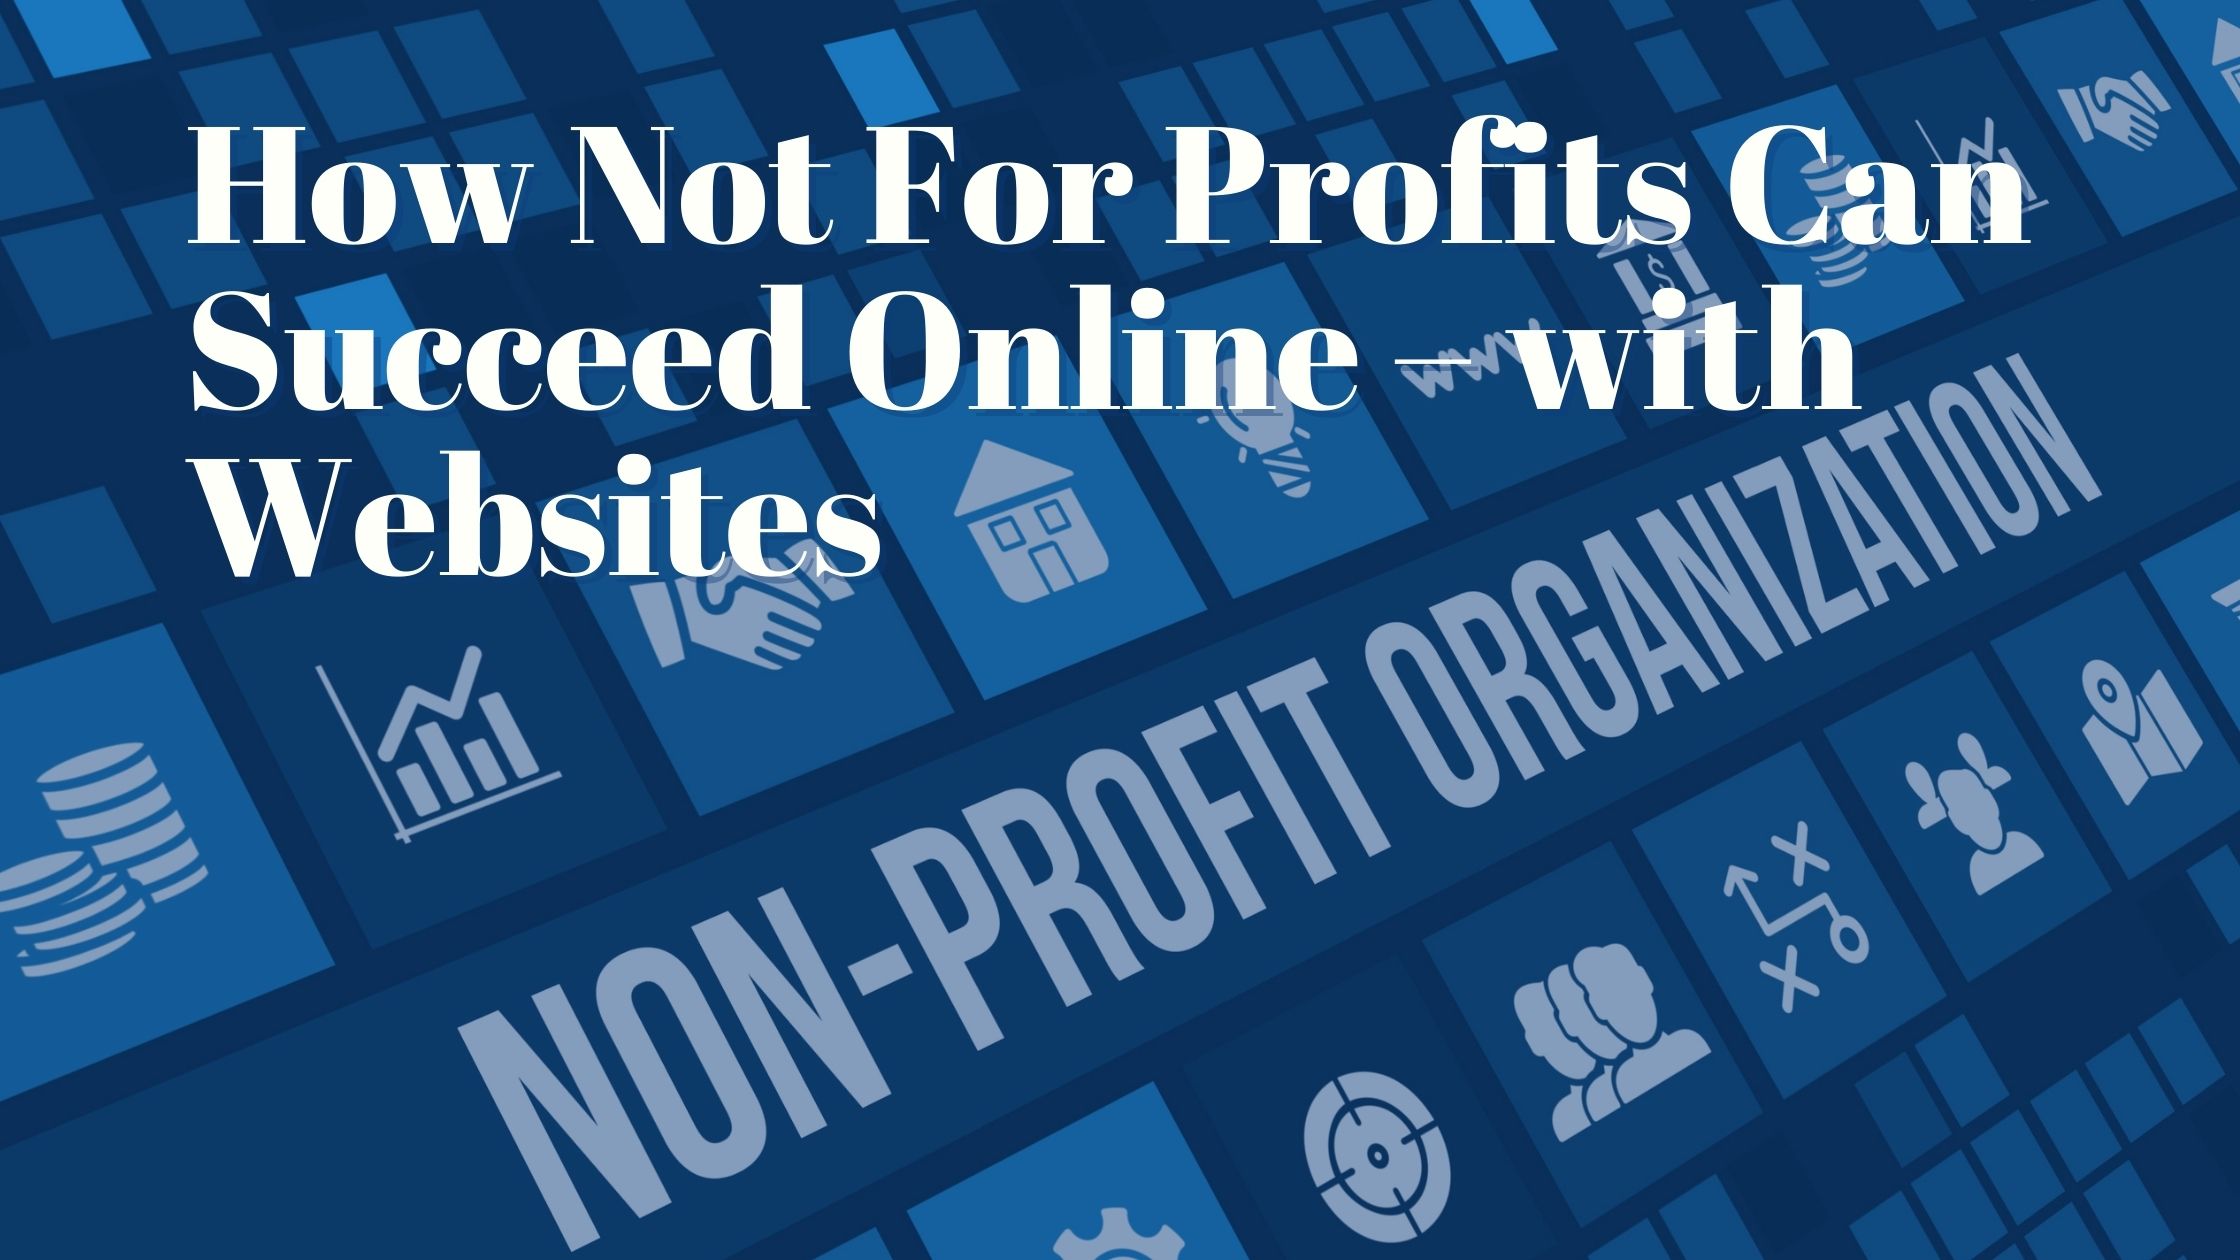 How Not For Profits Can Succeed Online with websites